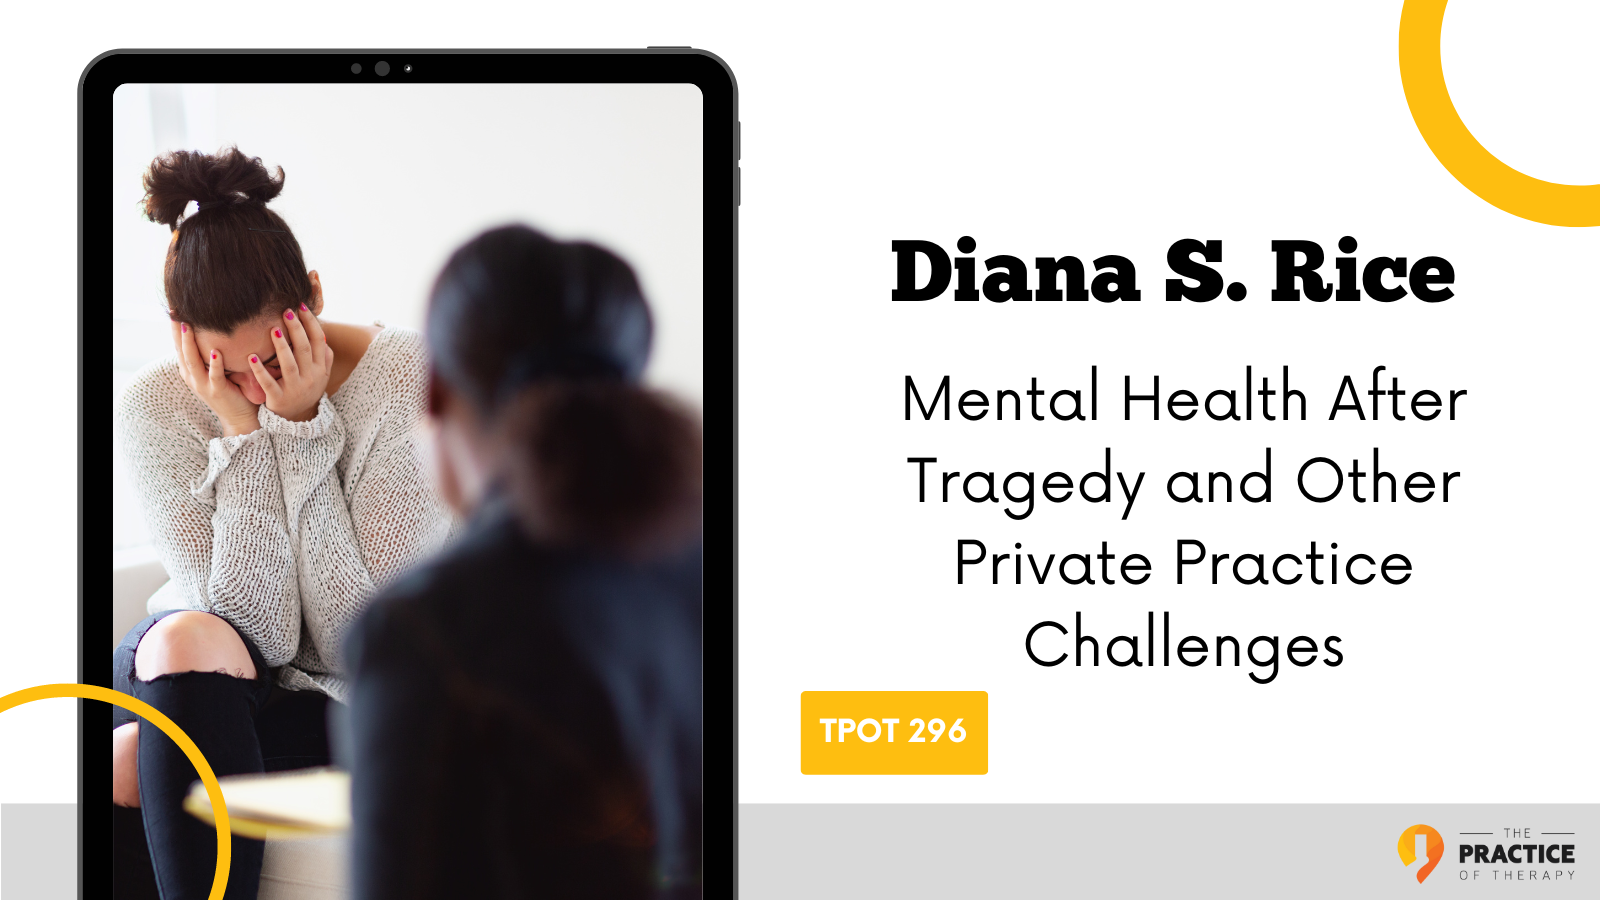 Diana S. Rice Mental Health After Tragedy and Other Private Practice Challenges TPOT 296